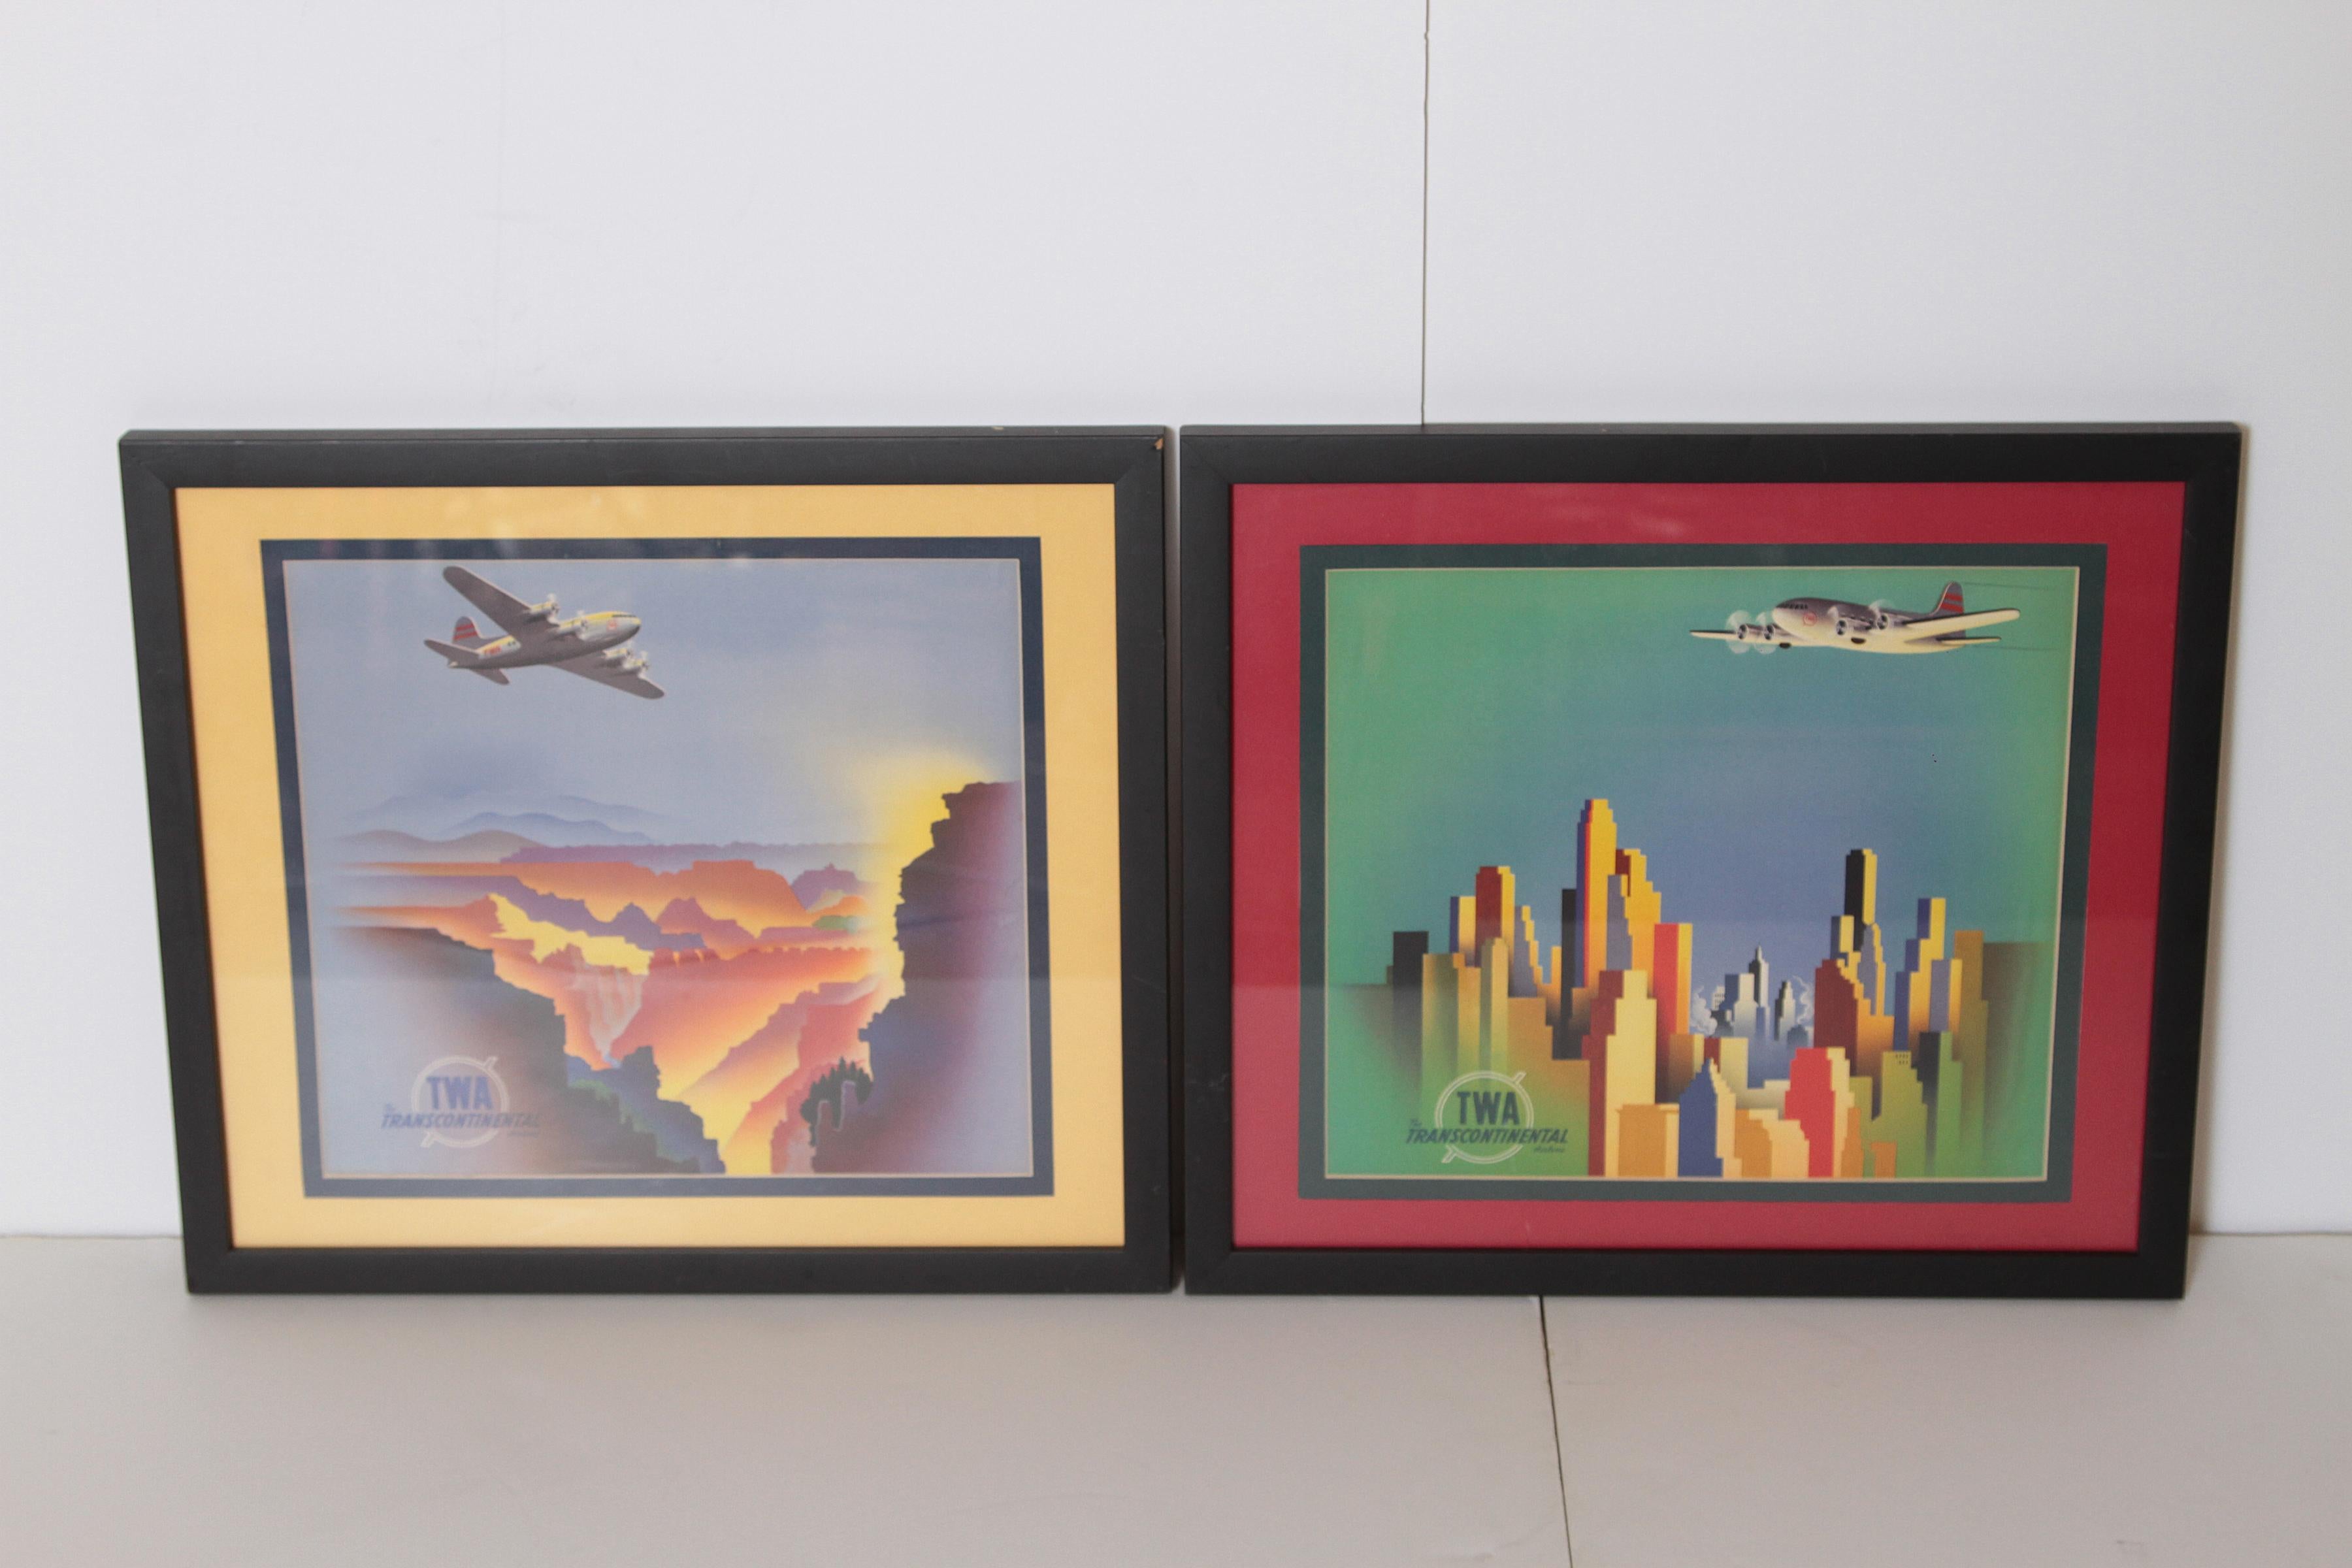 Art Deco Machine Age Cubist TWA  Posters / Placards, 1930s DC 3 Pair.  Transworld Airlines.  Trans World.

Featuring TWA's transcontinental DC 3 or the like flying over stylized modernist skyscraper visions of New York City and the Grand Canyon.